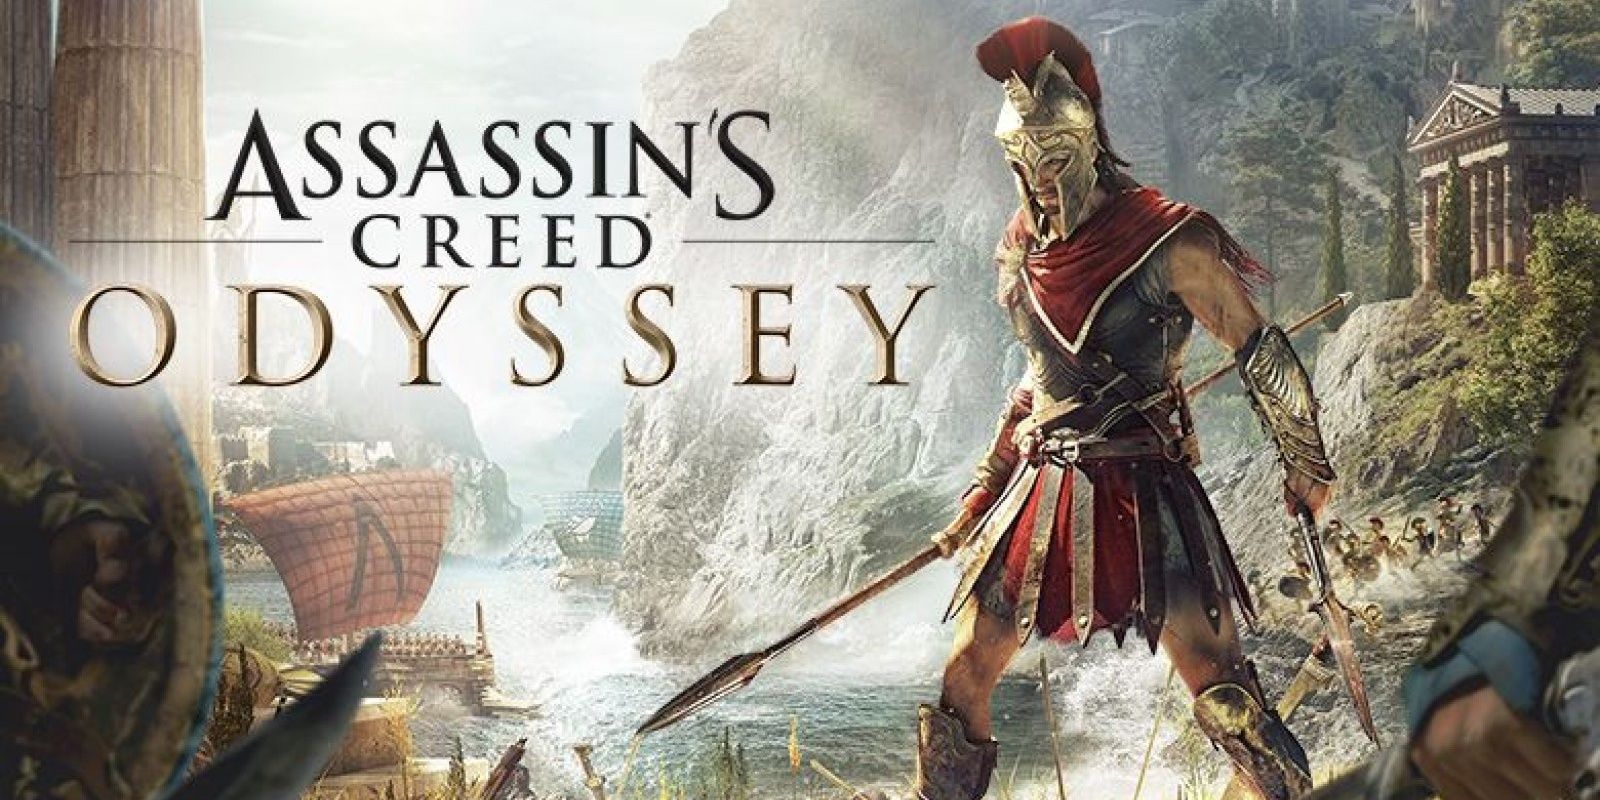 An armored soldier holding a spear in Ubisoft's Assassin's Creed Odyssey